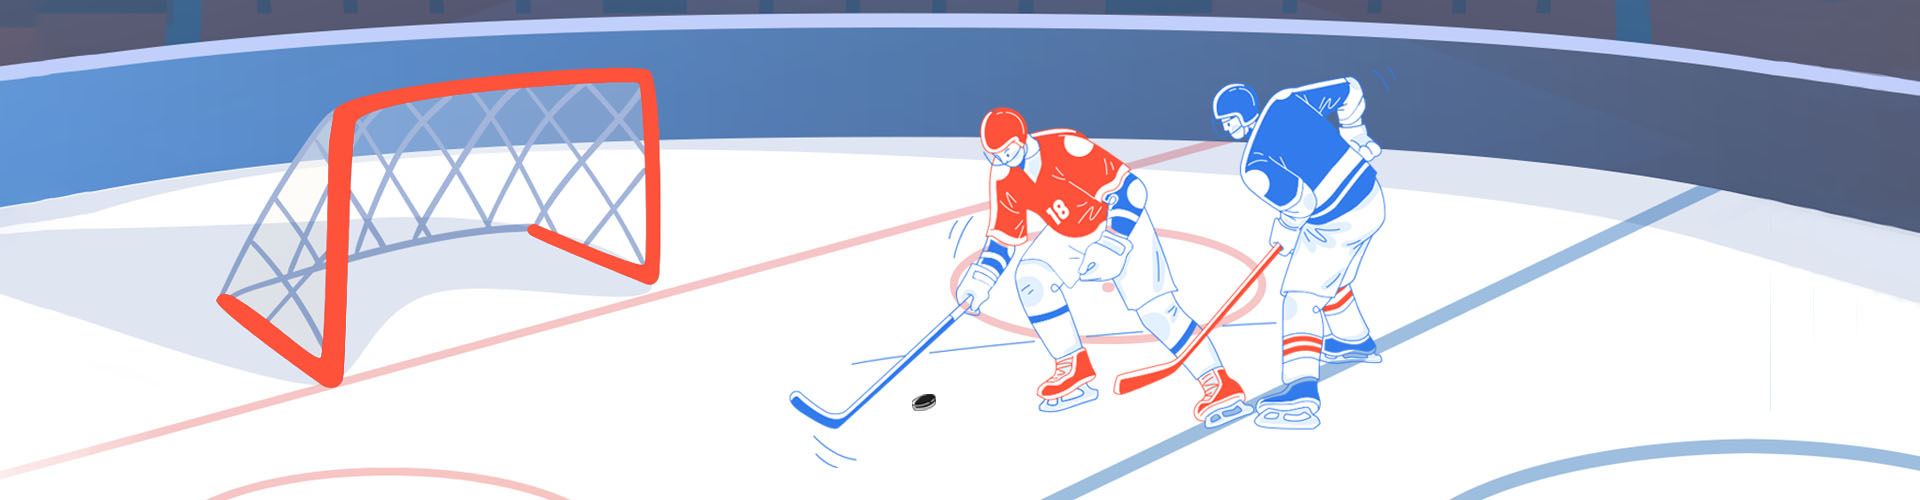 Two illustrated ice hockey players, one in red, one in blue, battle for the puck on the blue line.